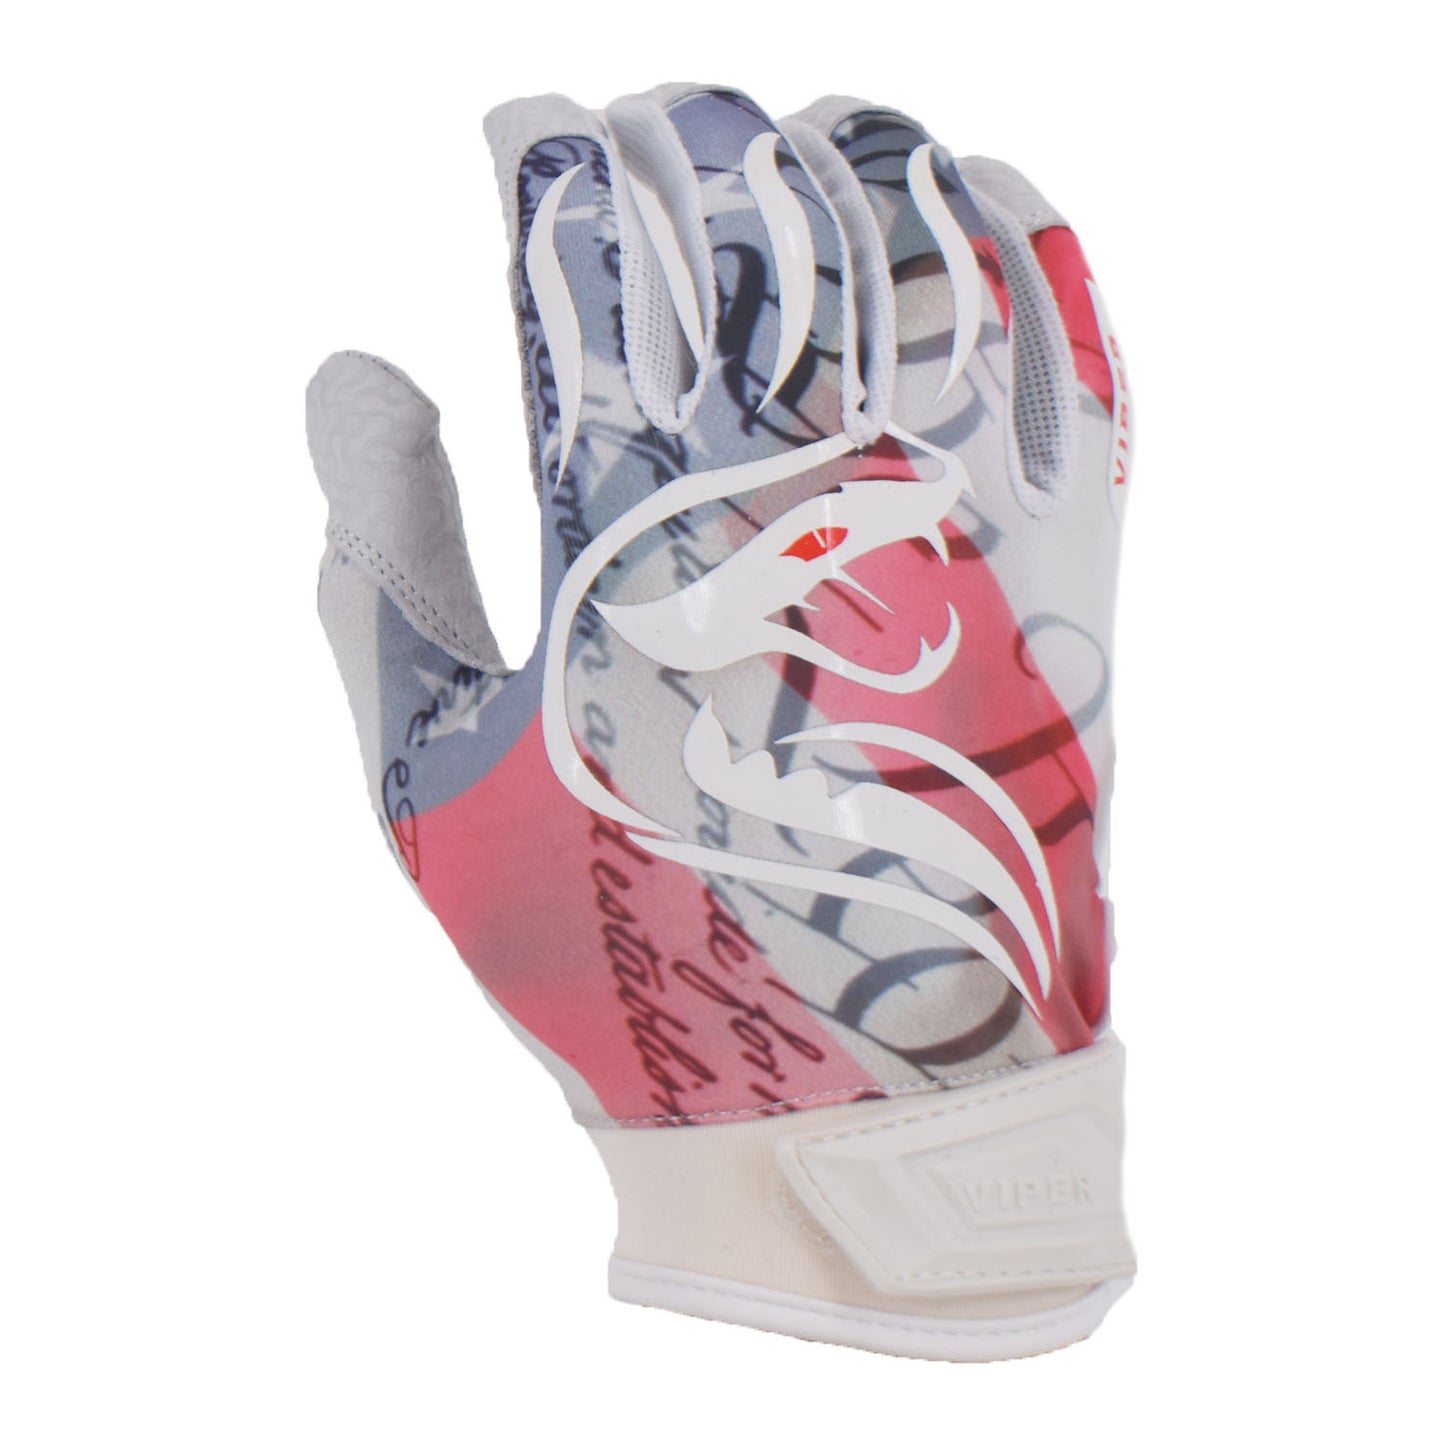 Viper Lite Premium Batting Gloves Leather Palm - We The People